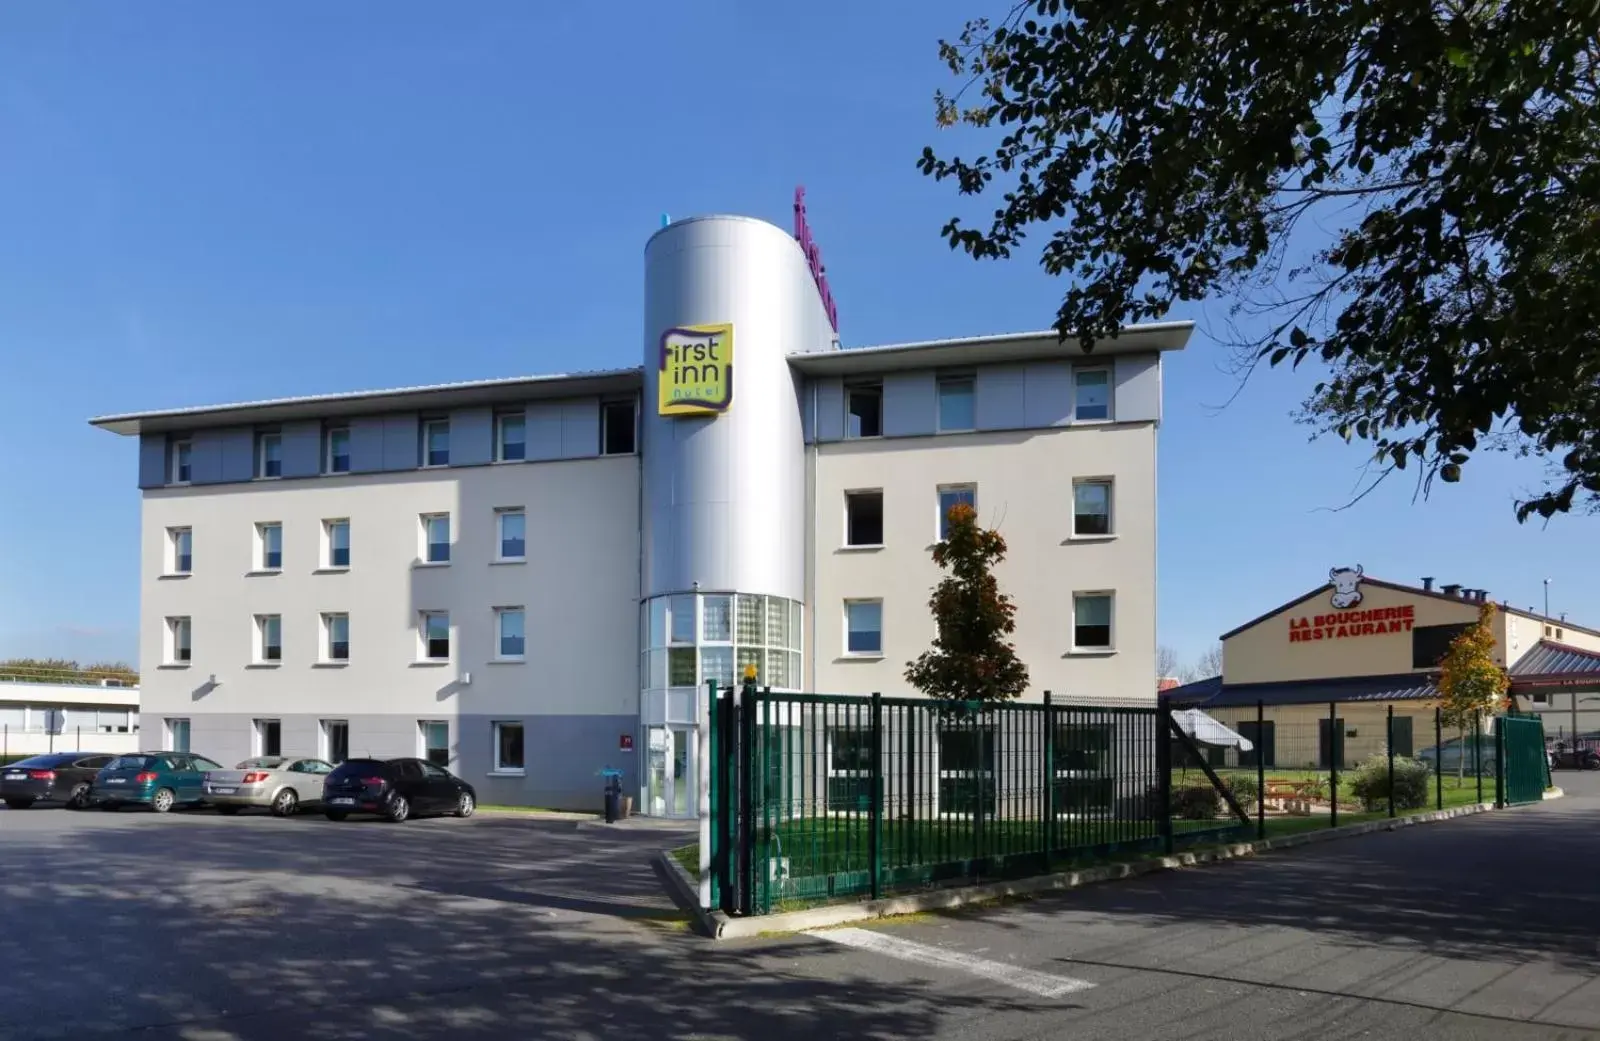 Property Building in First Inn Hotel Paris Sud Les Ulis